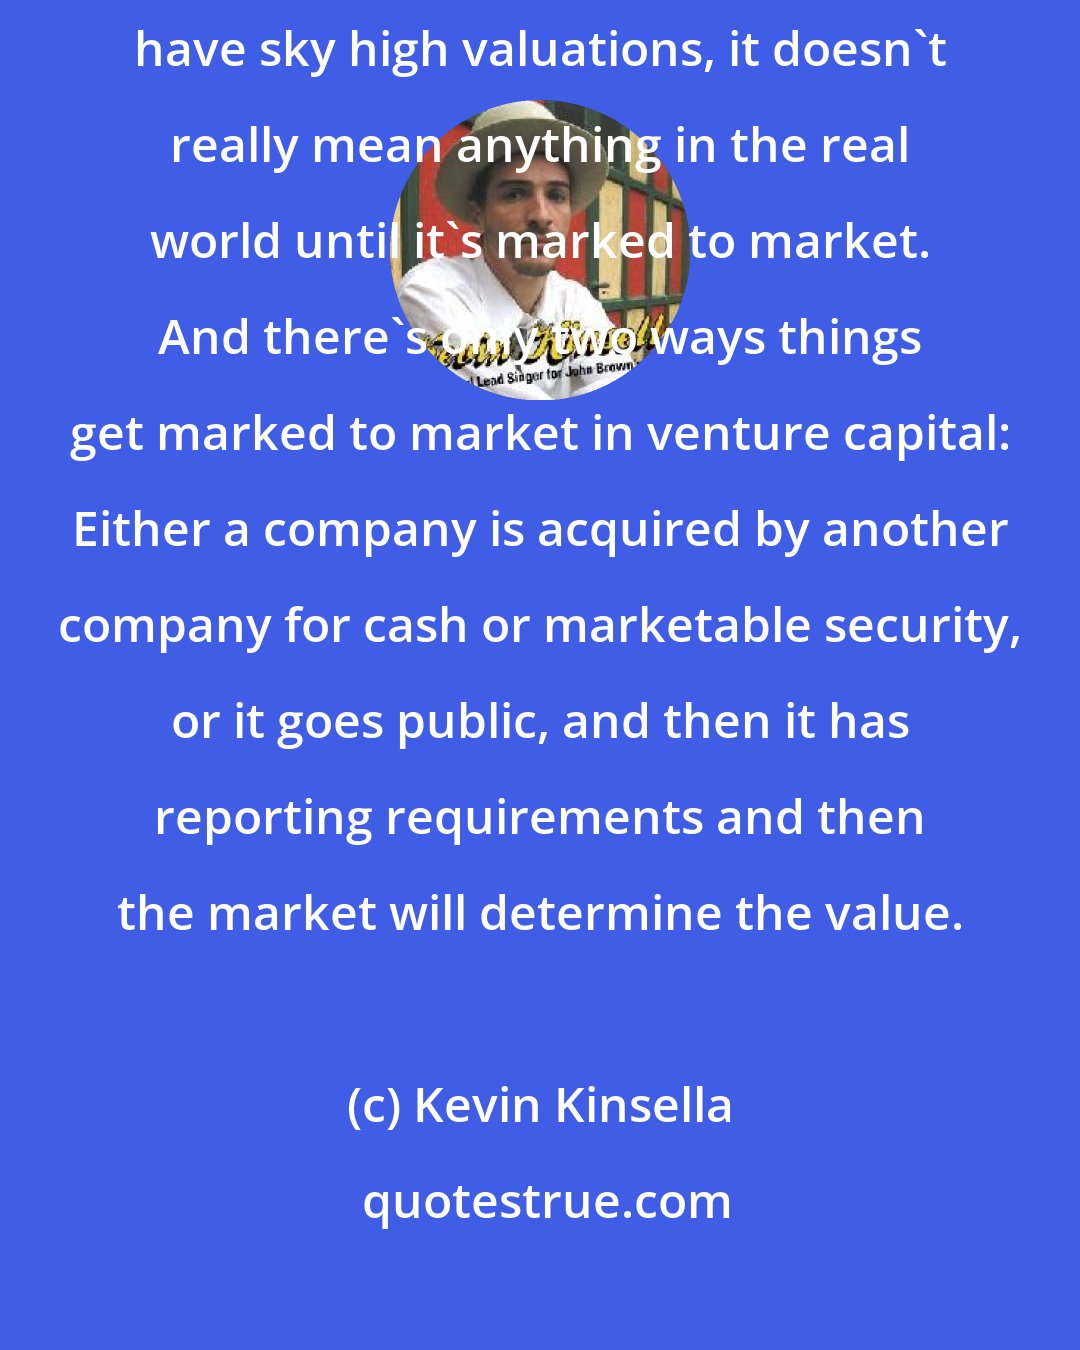 Kevin Kinsella: Basically my point of view on unicorns is that private companies which have sky high valuations, it doesn't really mean anything in the real world until it's marked to market. And there's only two ways things get marked to market in venture capital: Either a company is acquired by another company for cash or marketable security, or it goes public, and then it has reporting requirements and then the market will determine the value.